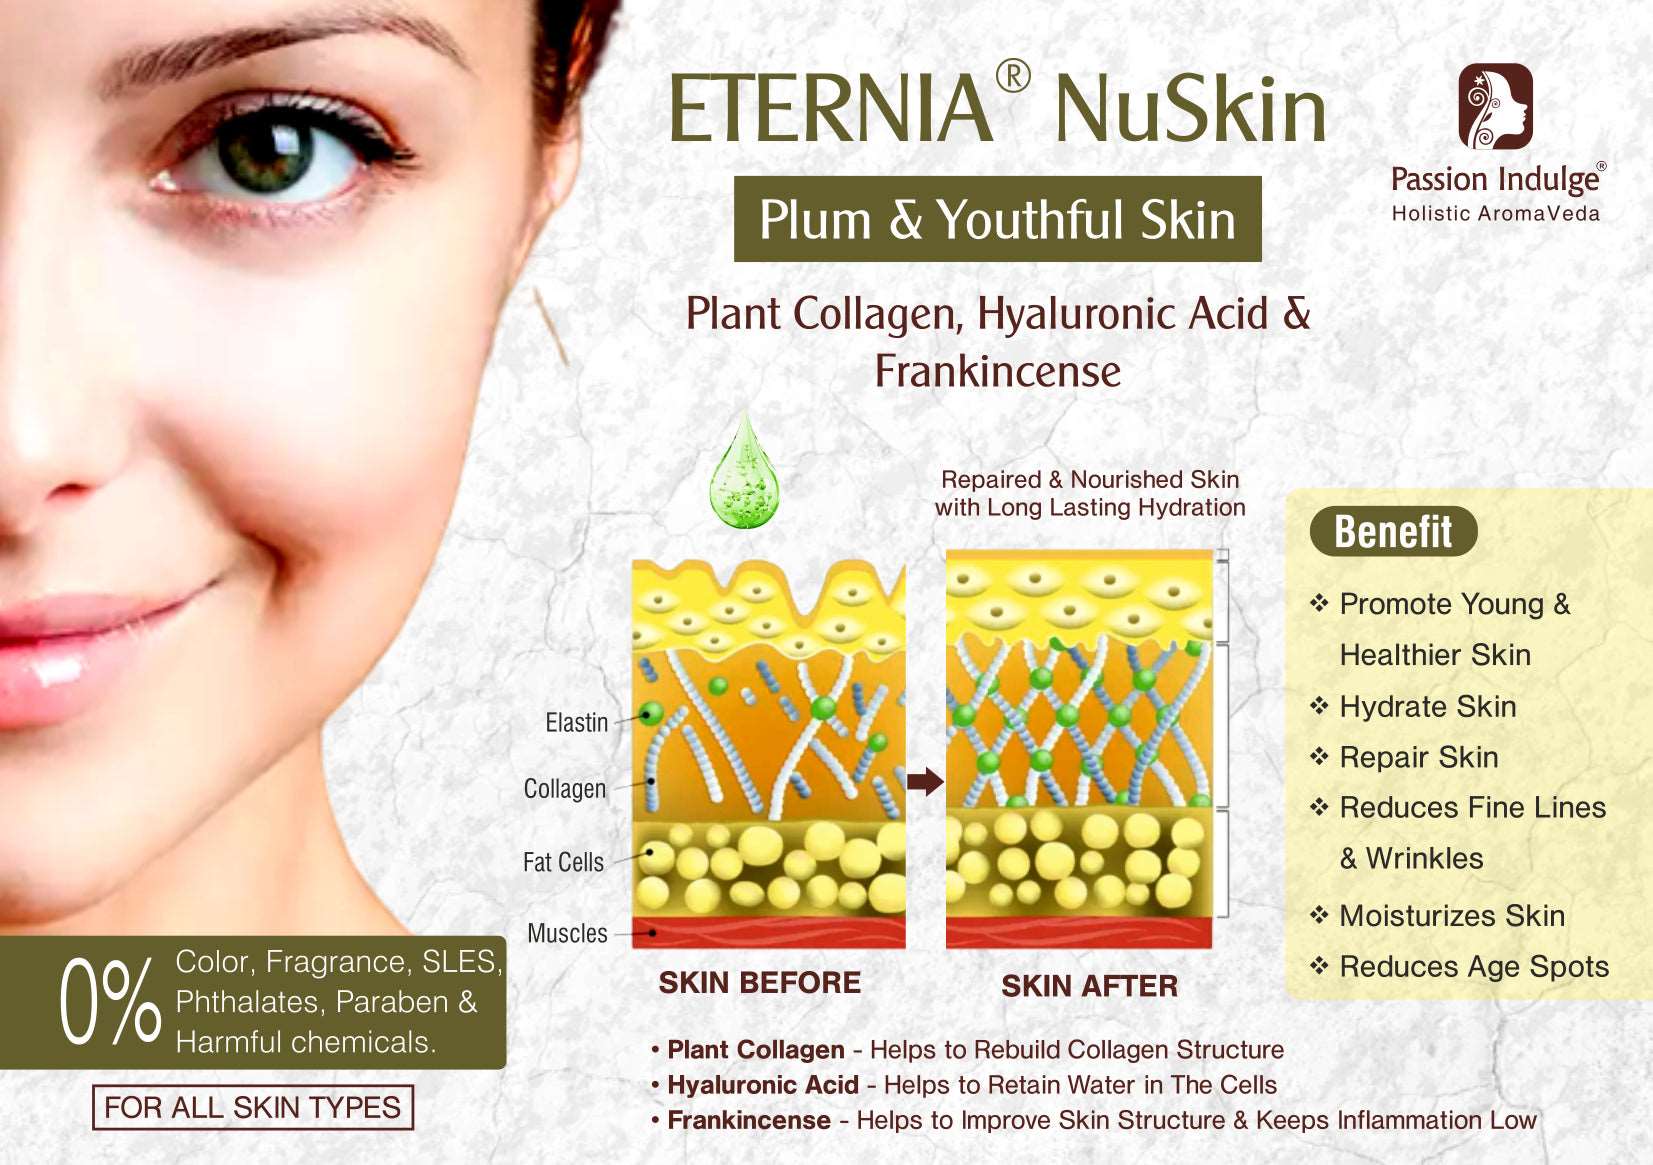 Eternia NuSkin Face Scrubb 200gm For Youthful Skin, Anti-Aging | Anti-Wrinkle | Skin Hydration & Nourishes | With Plant Collagen, Hyaluronic Acid & Frankincense | Natural